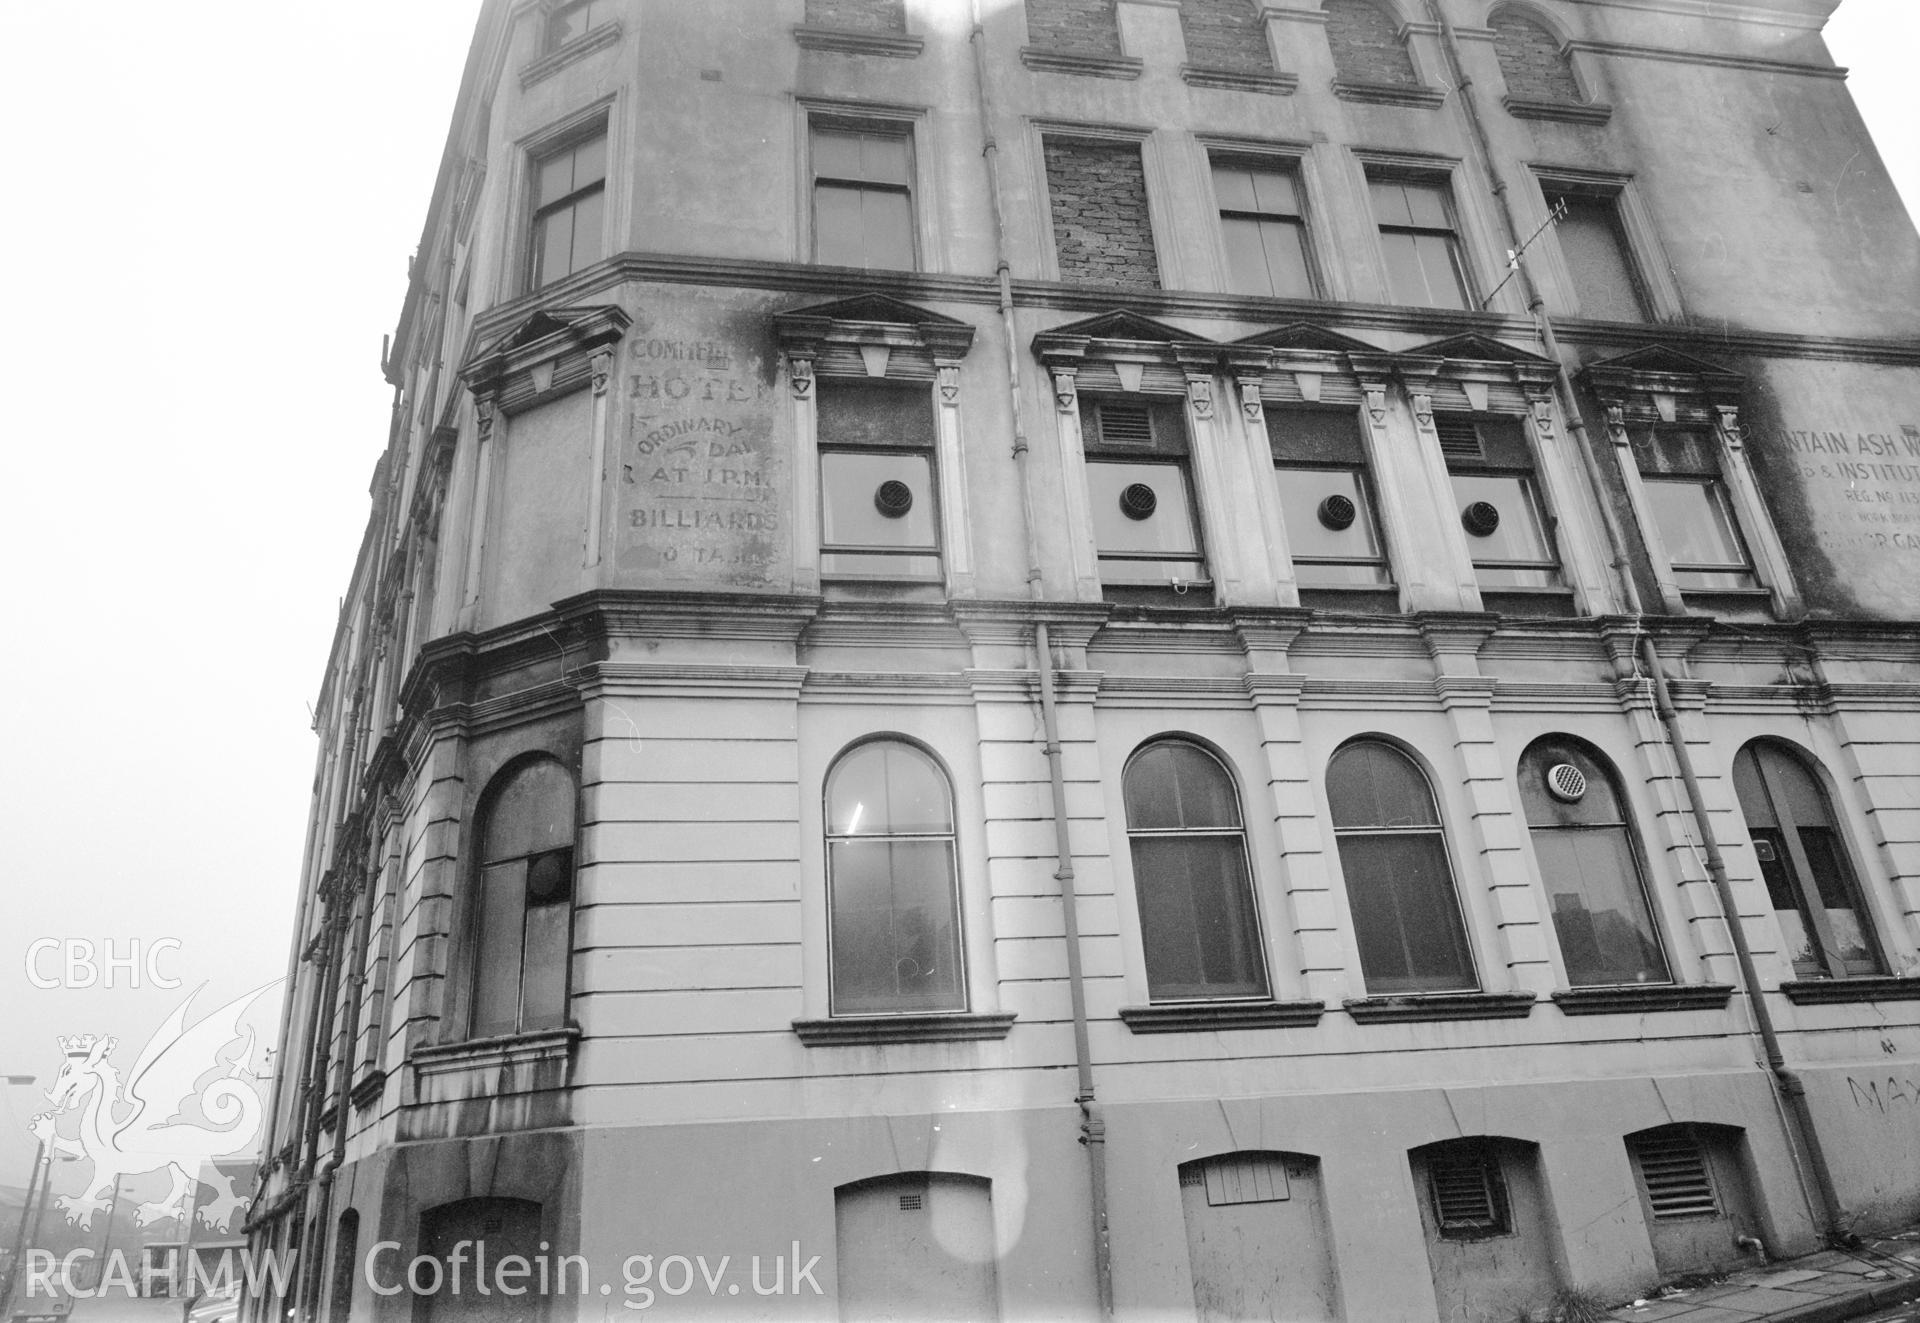 Digital copy of a black and white negative showing an exterior view of the Grand Hotel, Mountain Ash.